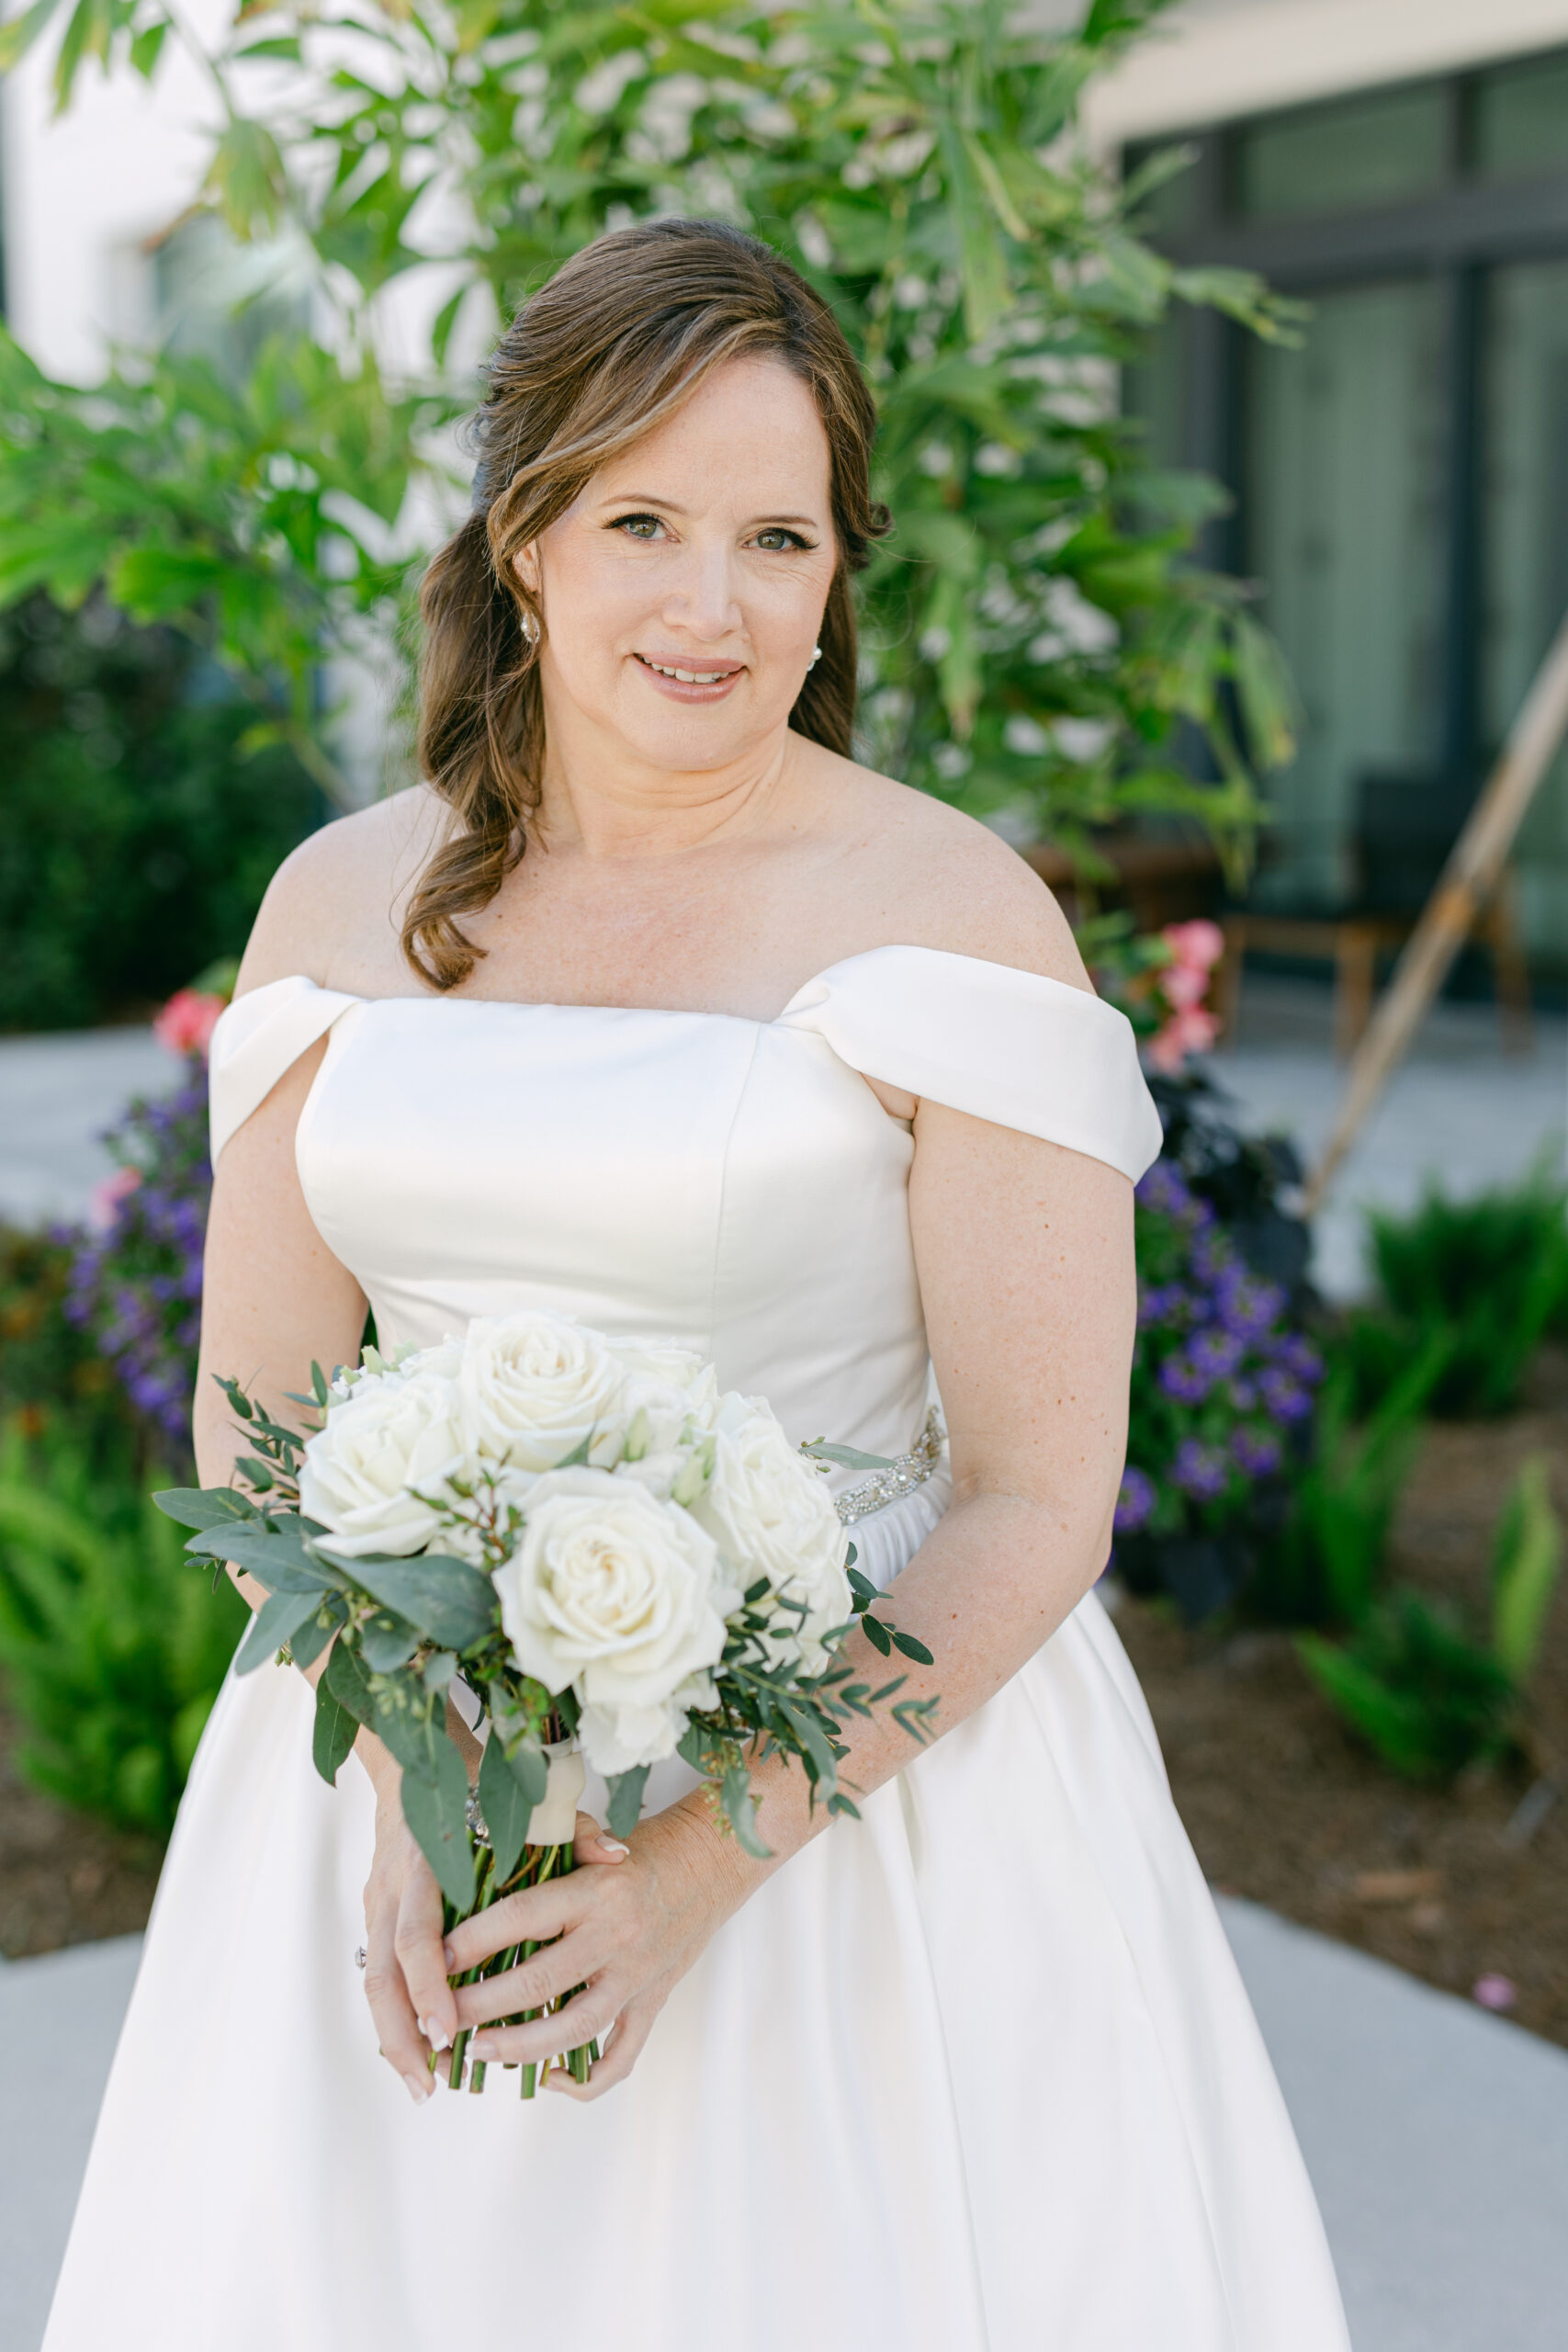 Stunning bride with mature skin and flawless makeup done by Kristys Hair and Makeup.